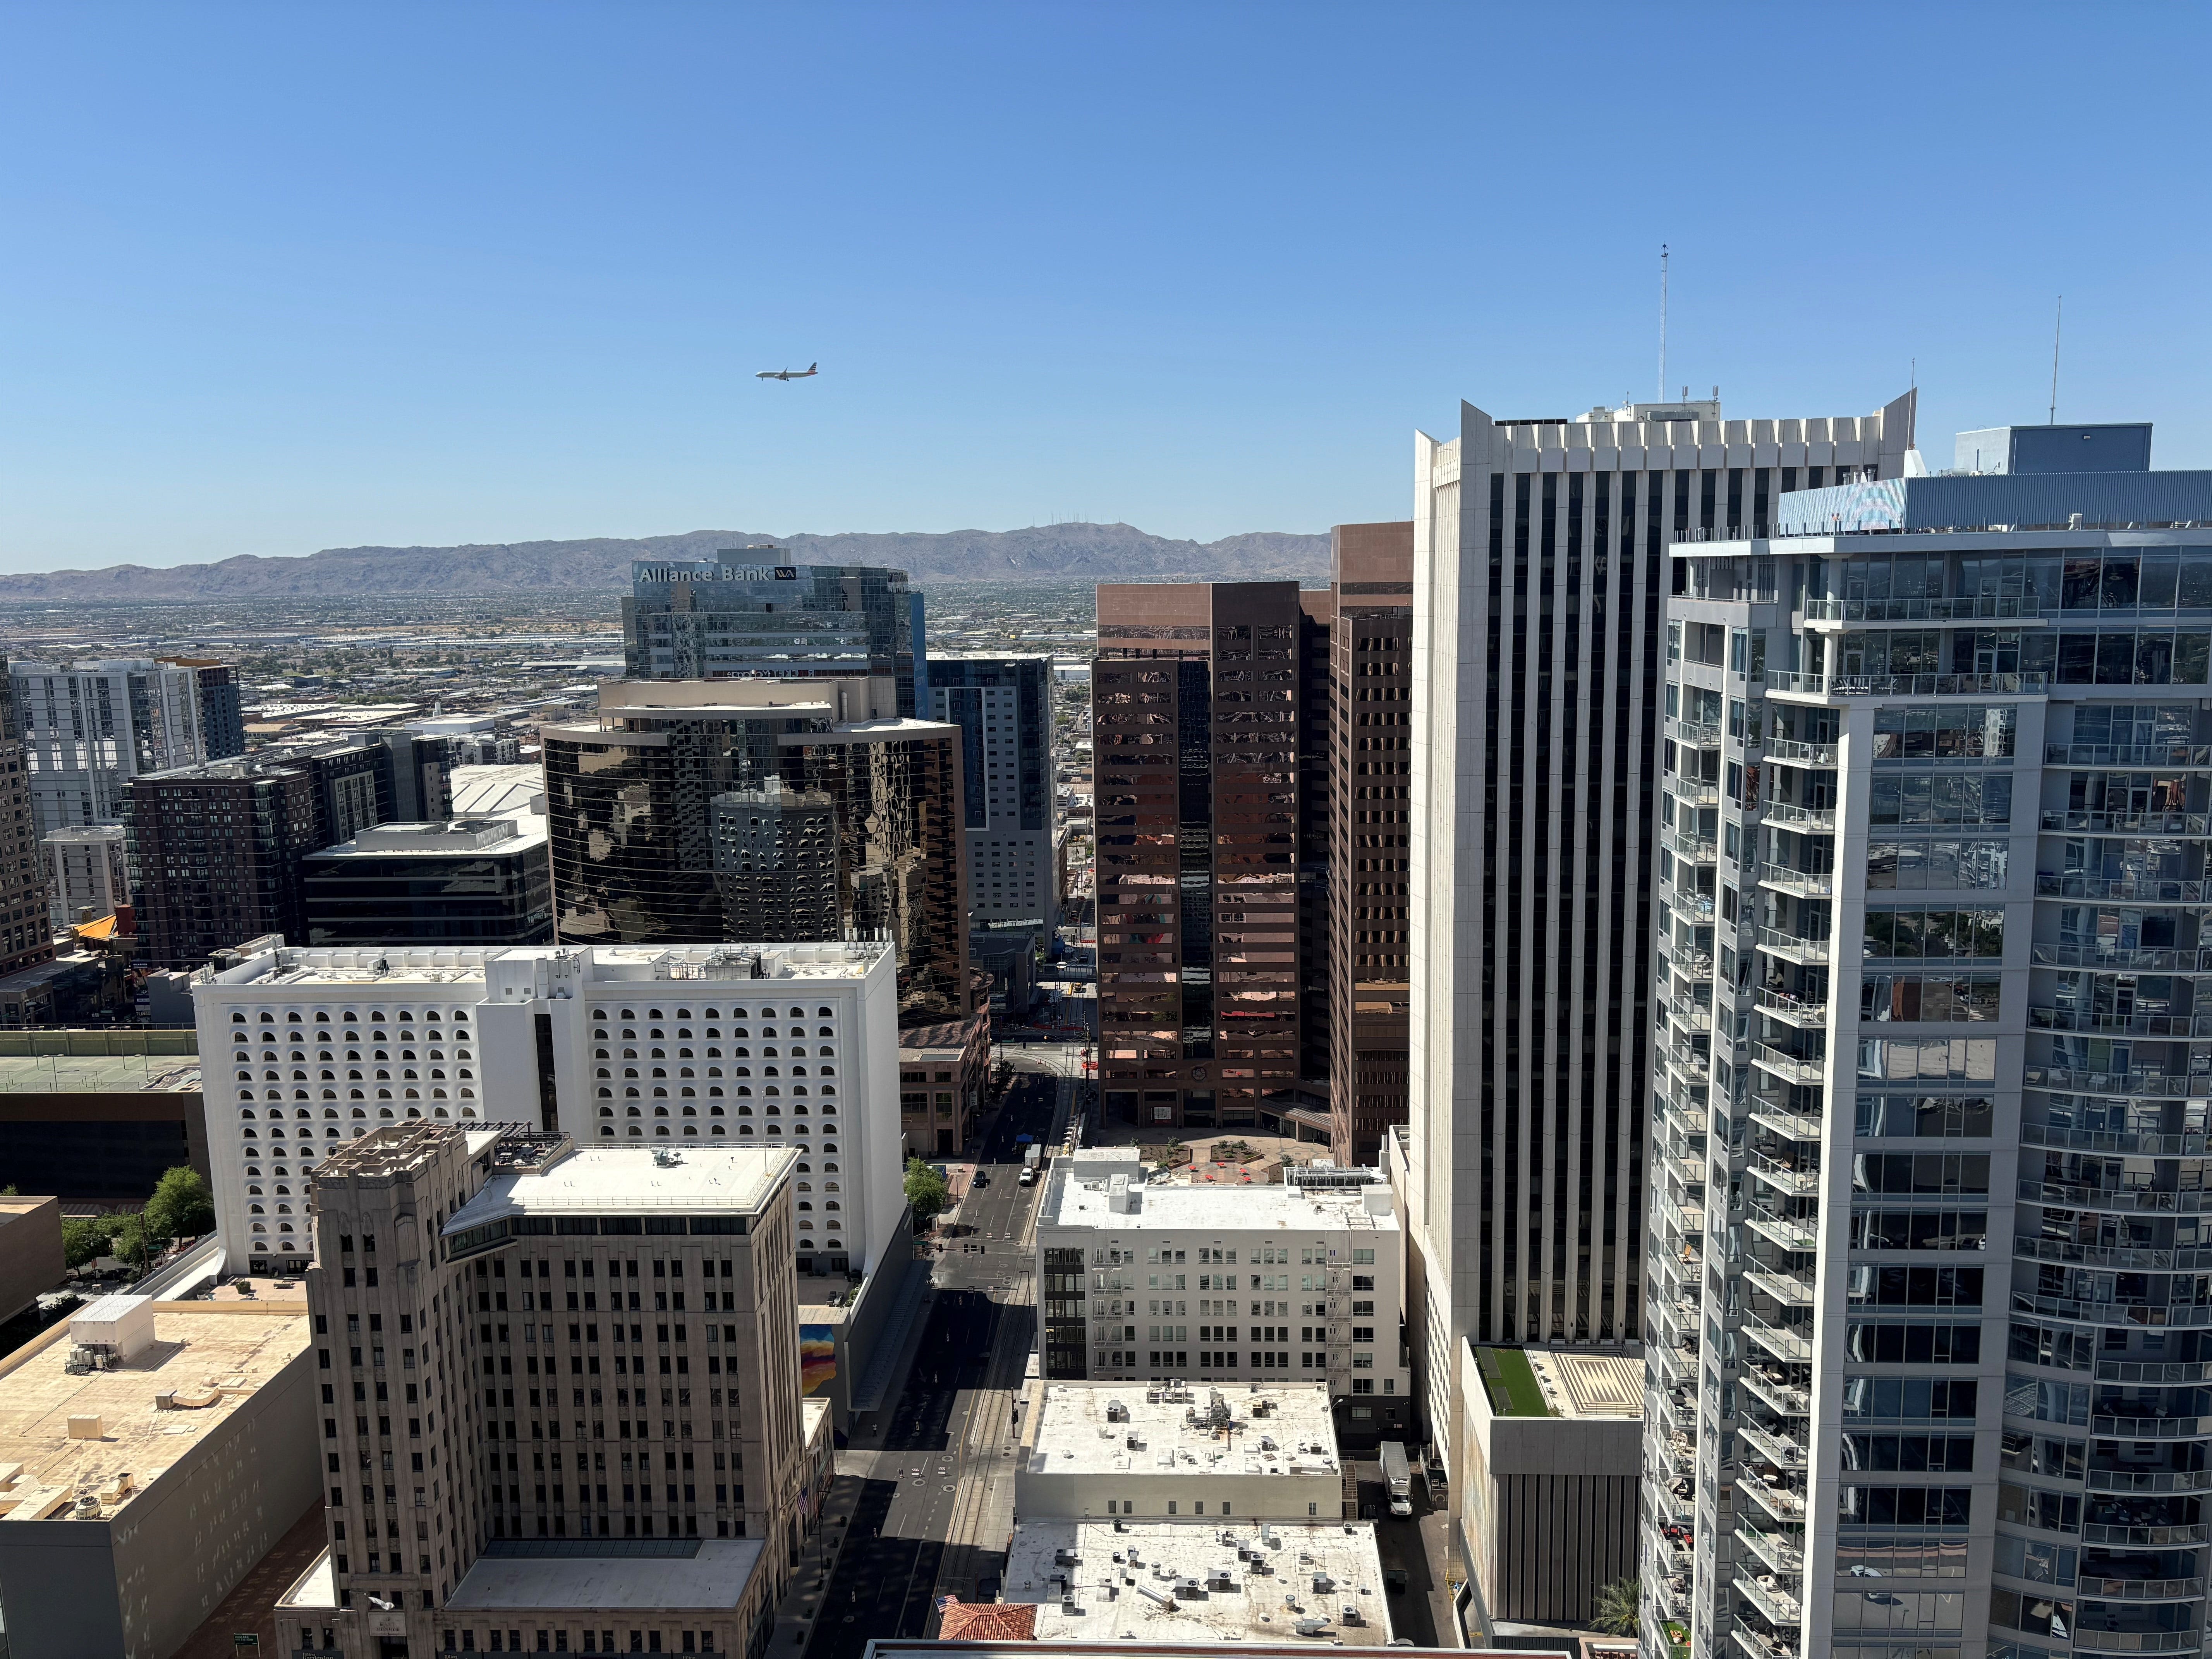 Downtown Phoenix development to have transit center, apartment towers. Take a look